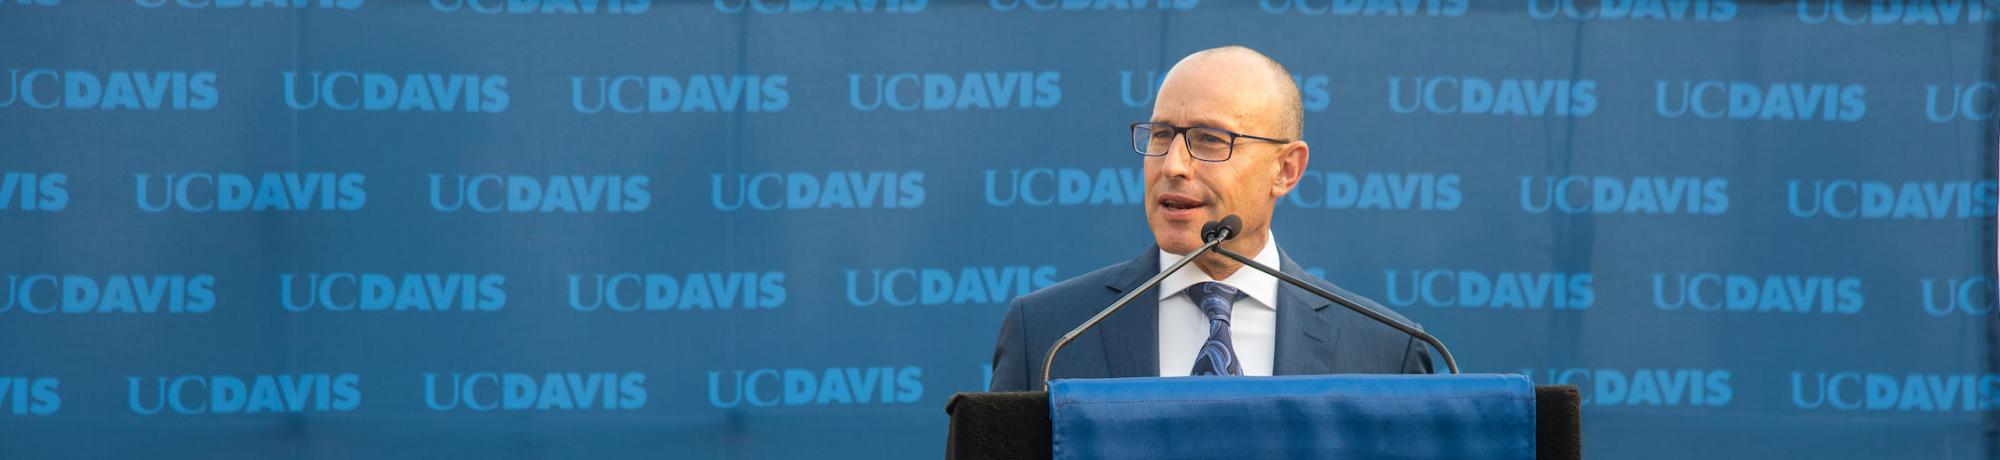 press conference featuring the CEO of UC Davis health